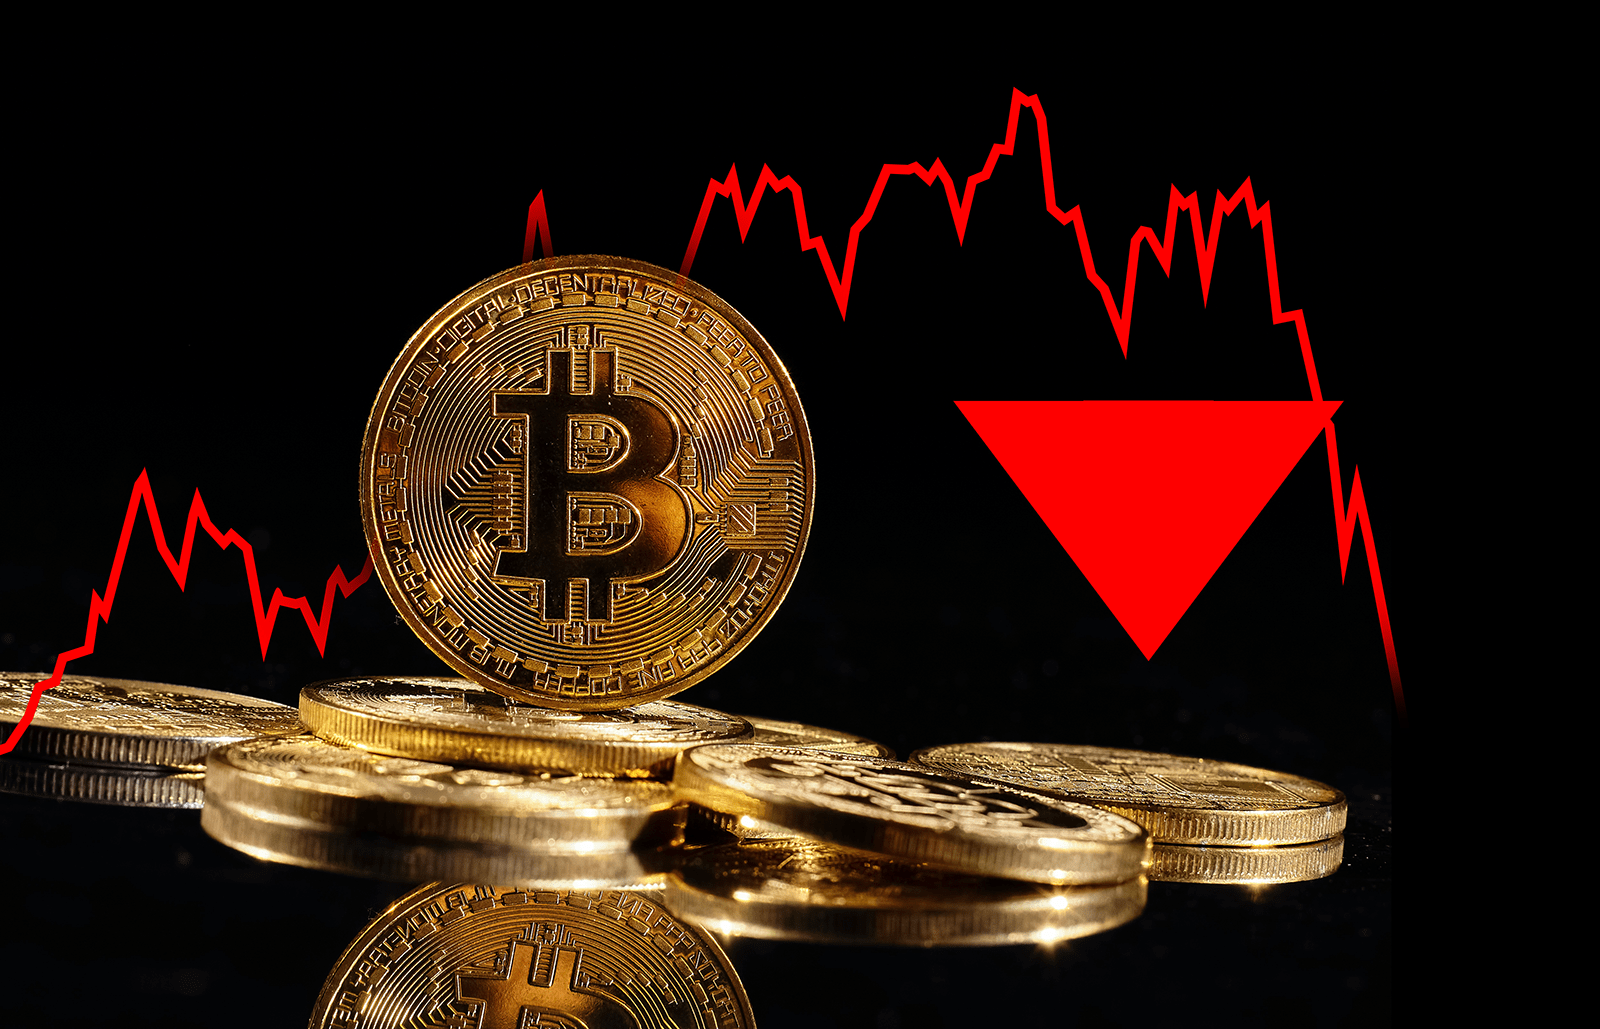 Bitcoin price slides 5% in 60 minutes amid Silvergate uncertainty